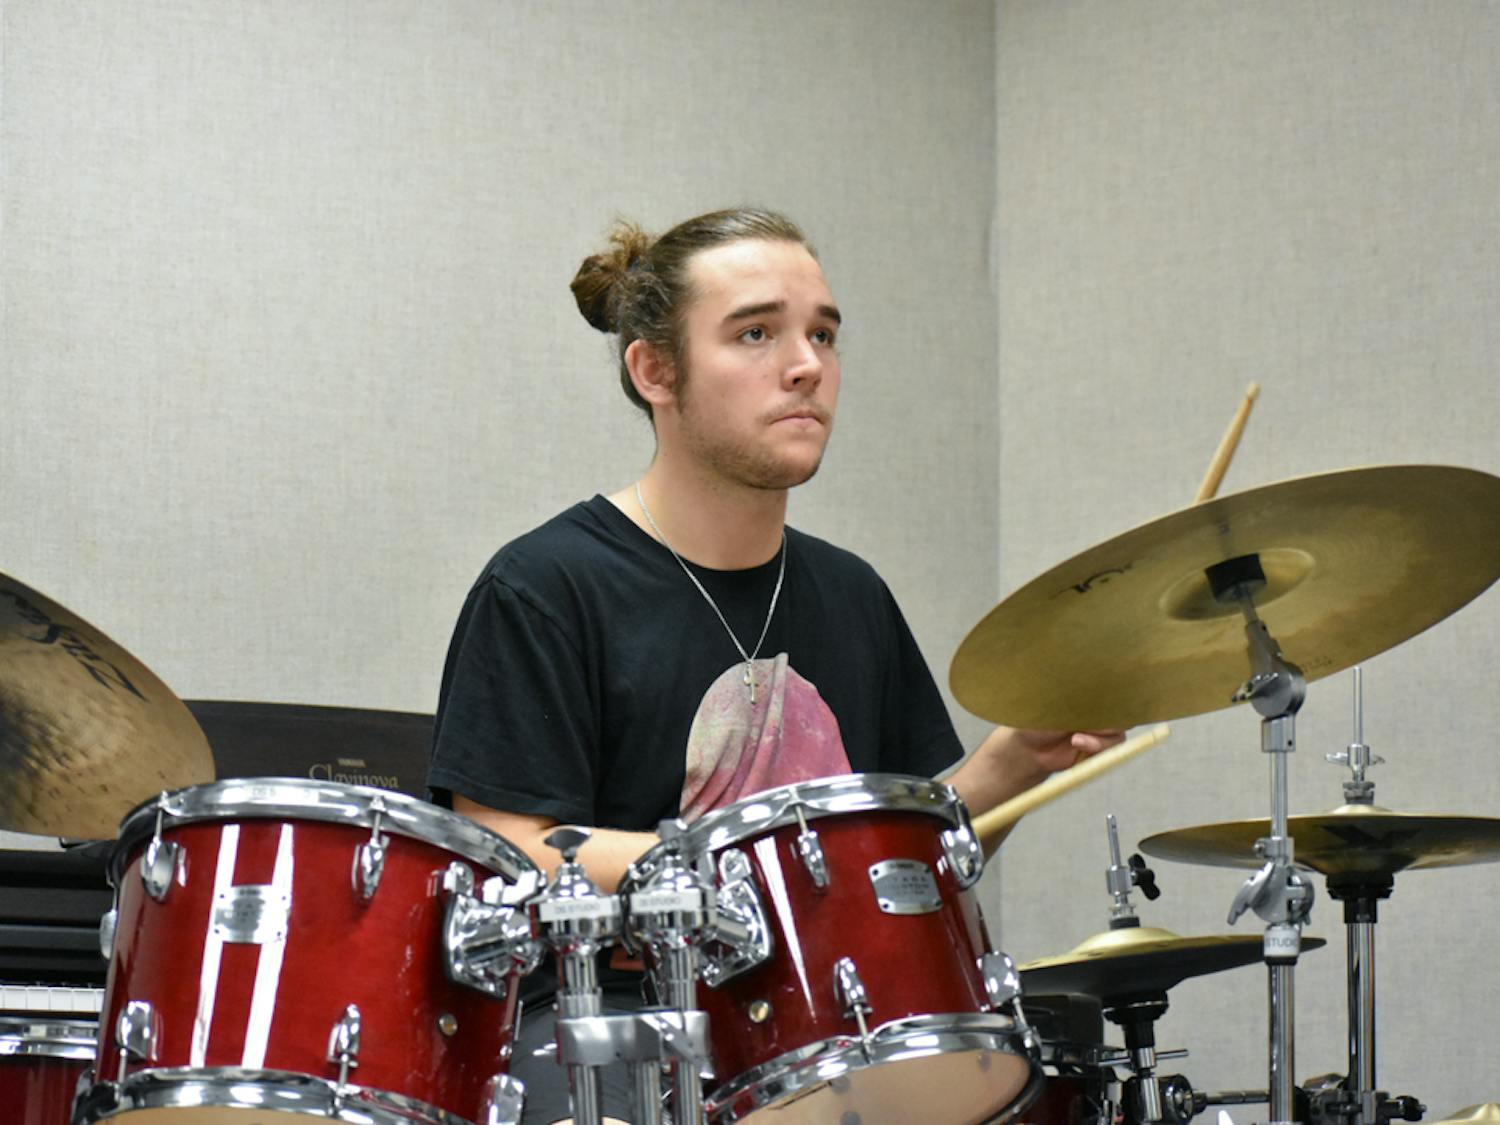 Second-year music industry studies student Nick Guzman plays the drum set during the ensemble’s rehearsal of “Santeria” by Sublime. Students in USC’s School of Music’s commercial music ensemble class said they have found comfort in performing and playing music as an outlet for creative therapy.